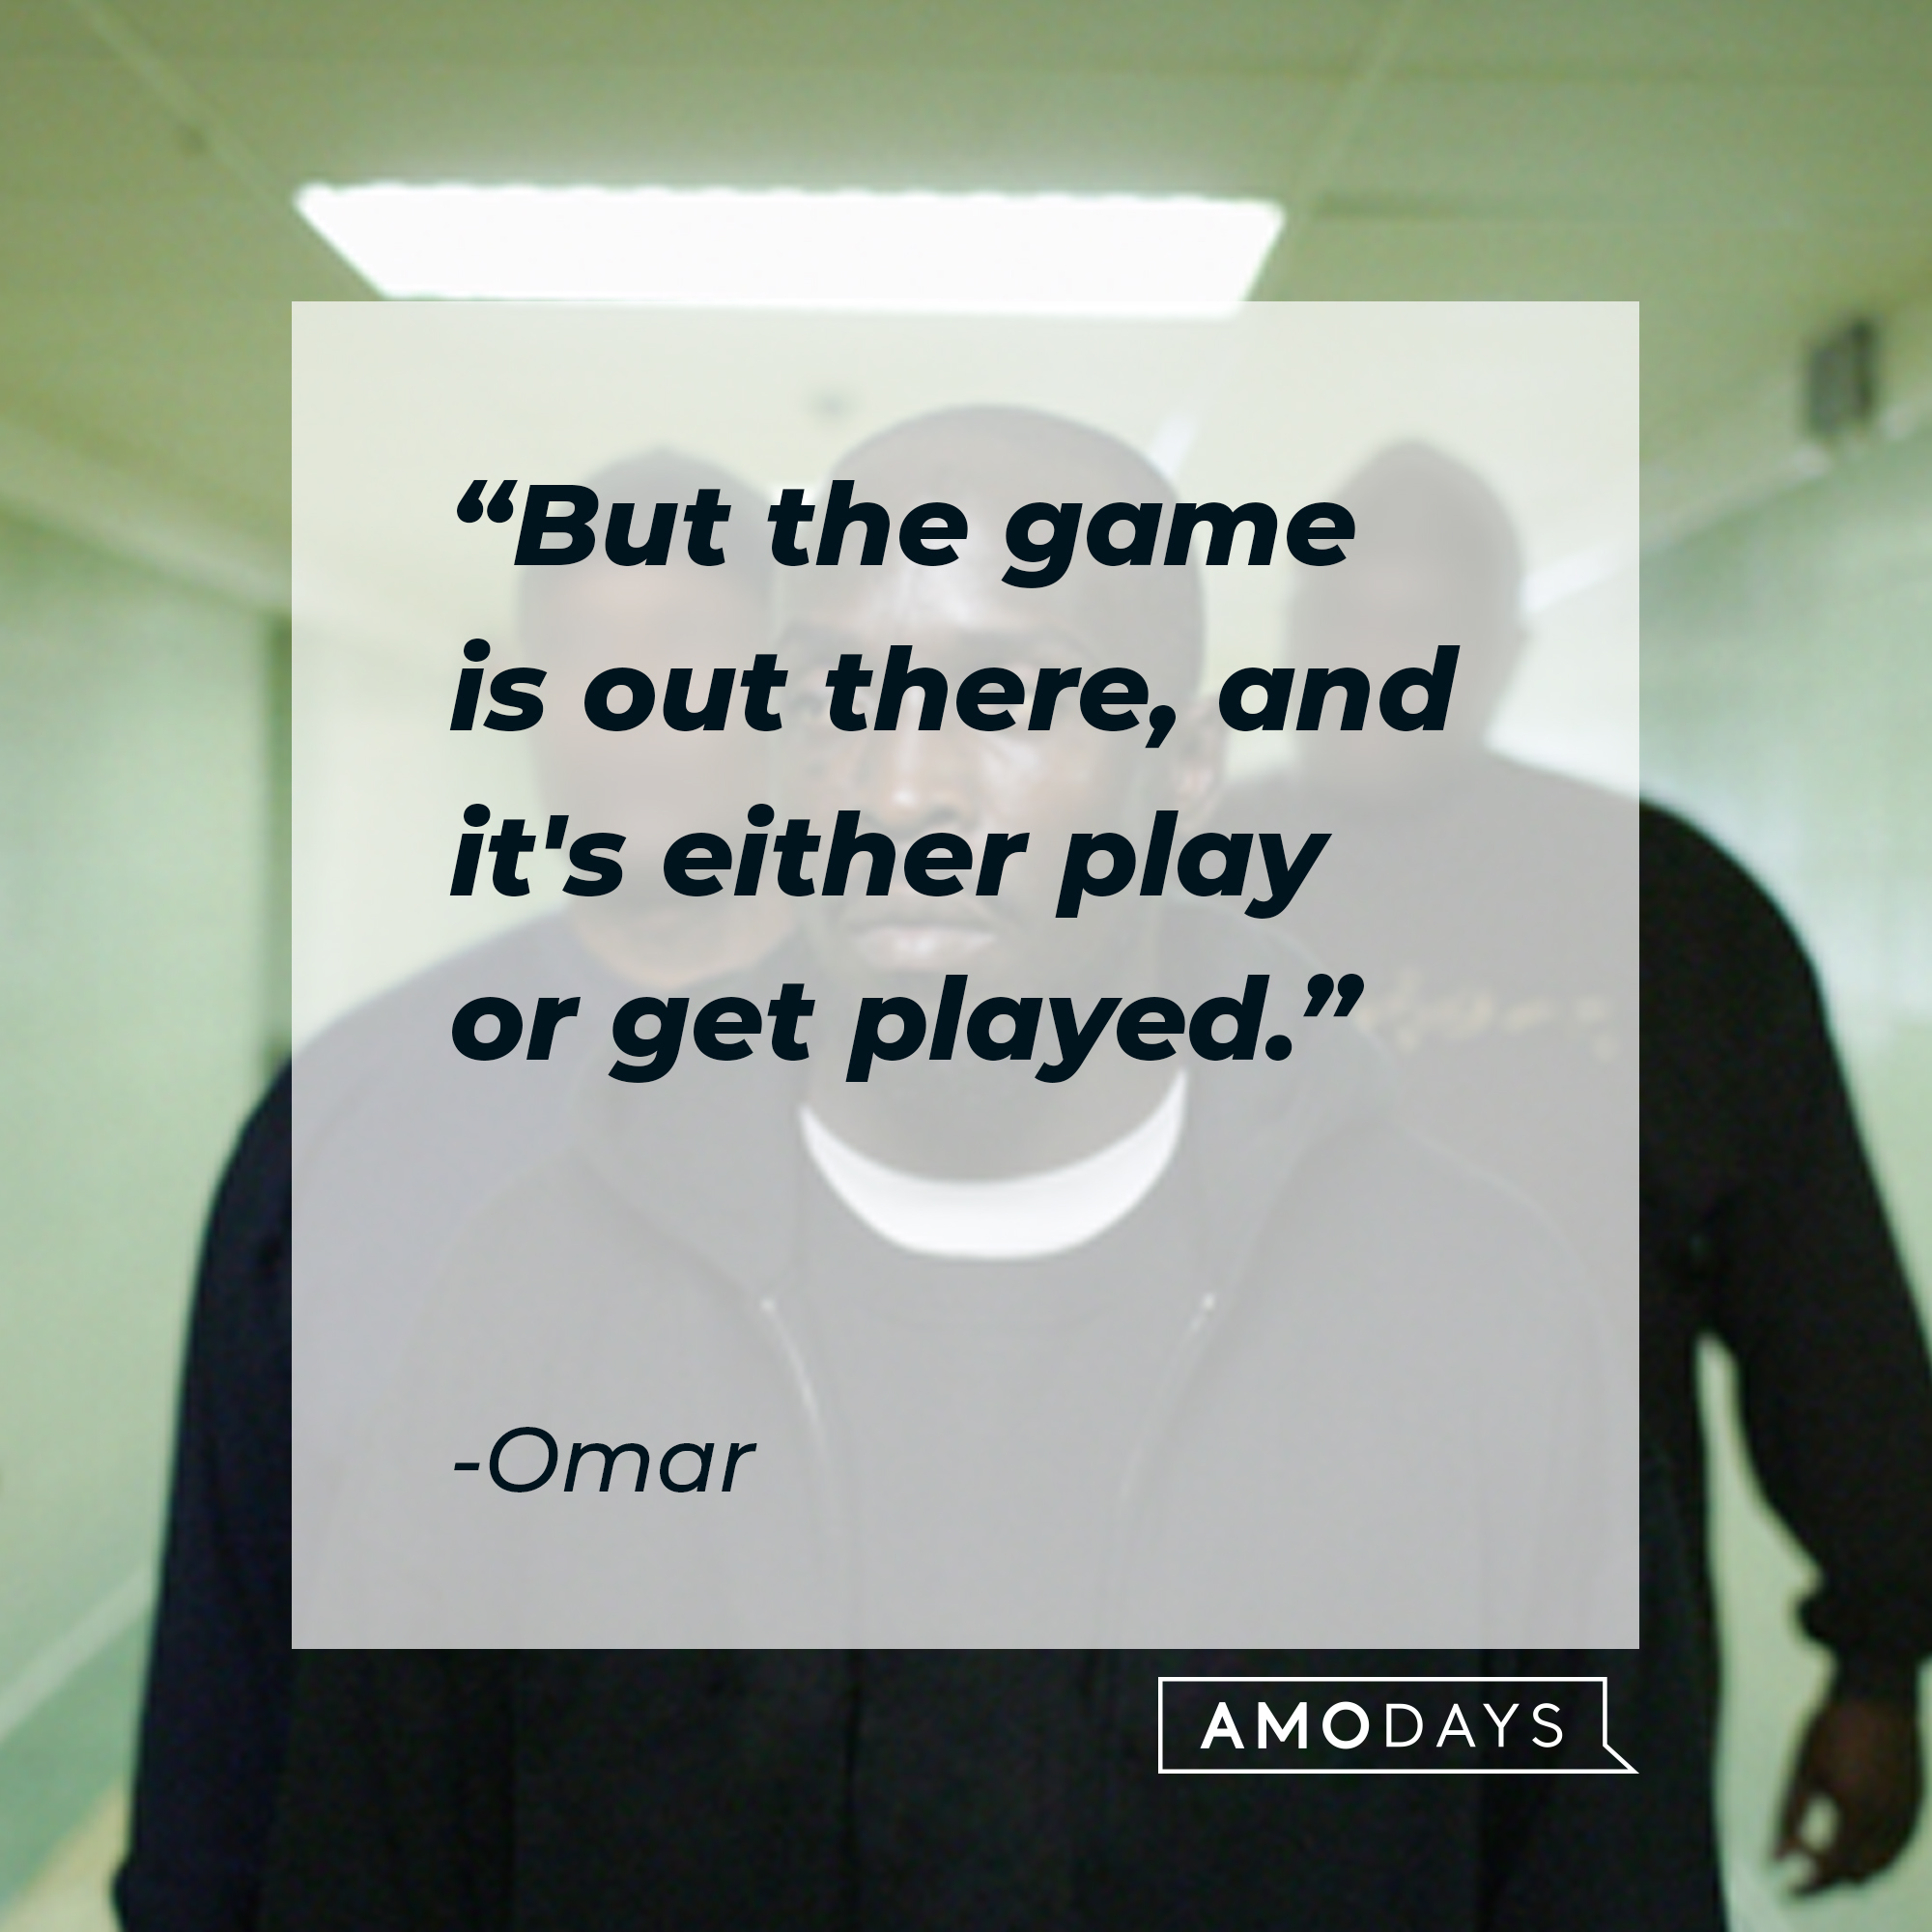 Omar's quote: "But the game is out there, and it's either play or get played." | Source: facebook.com/TheWire